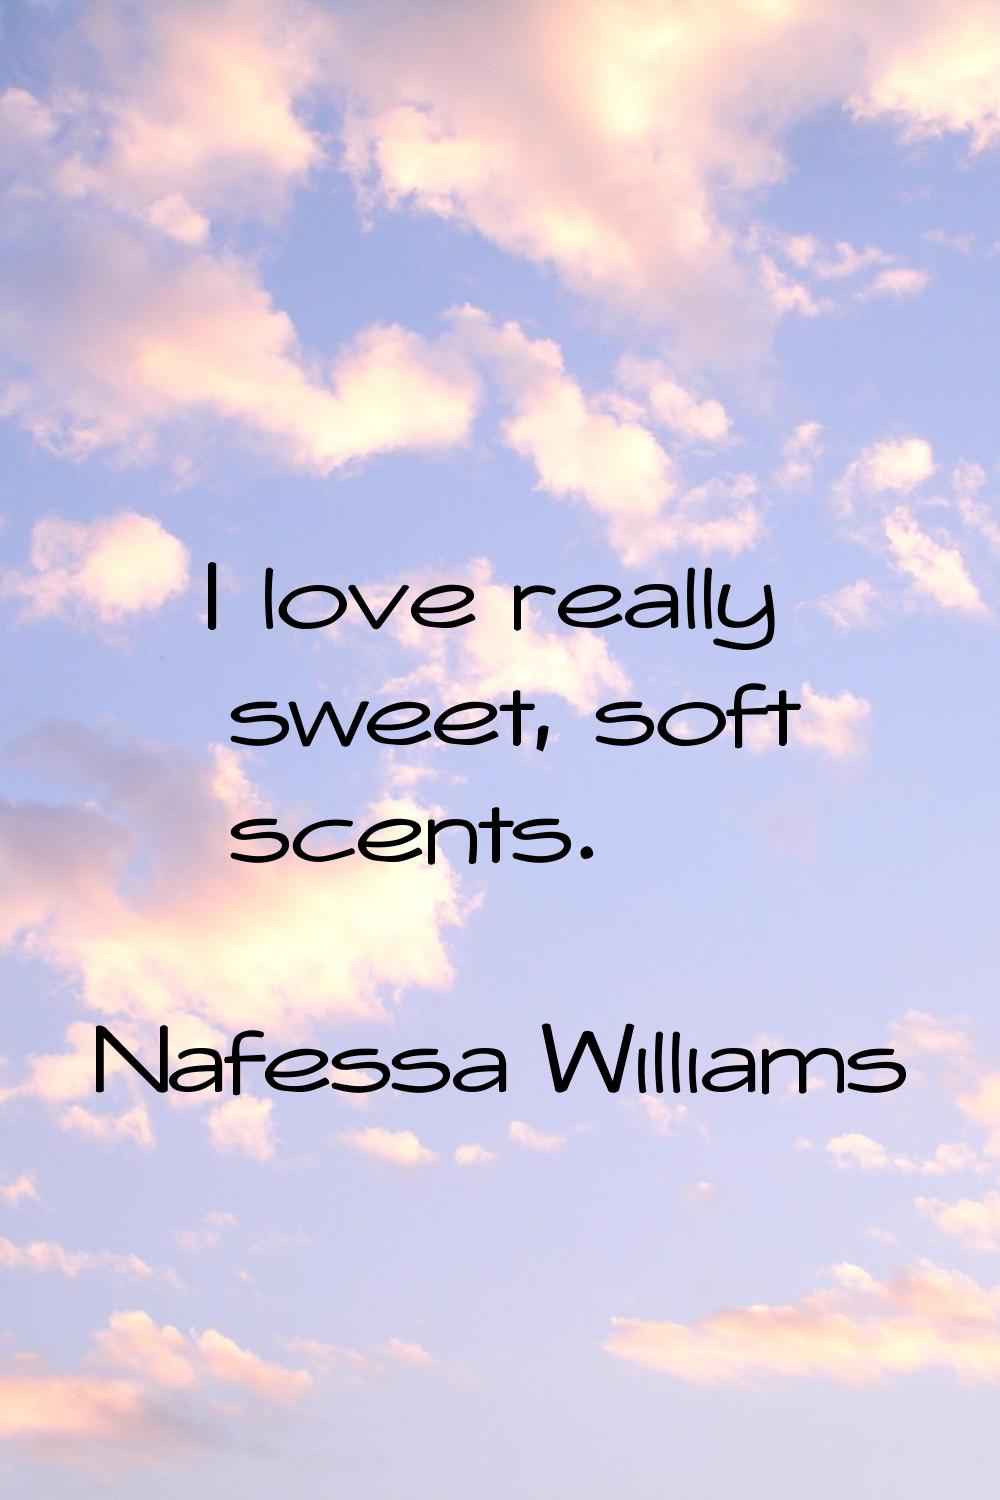 I love really sweet, soft scents.